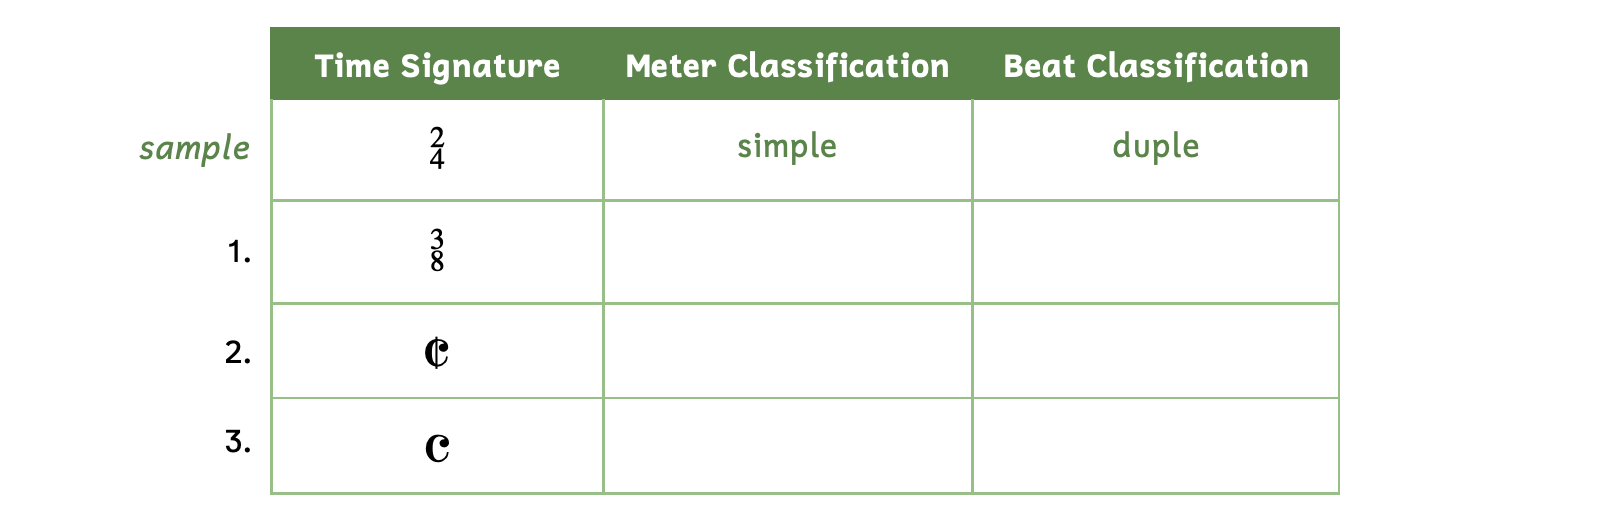 The first column gives the time signature, the second column asks for the meter classification and the third column asks for the beat classification. The sample gives the time signature 2-4. The meter classification is simple and the beat classification is duple. Number 1, 3-8. Number 2, cut time. Number 3, common time.